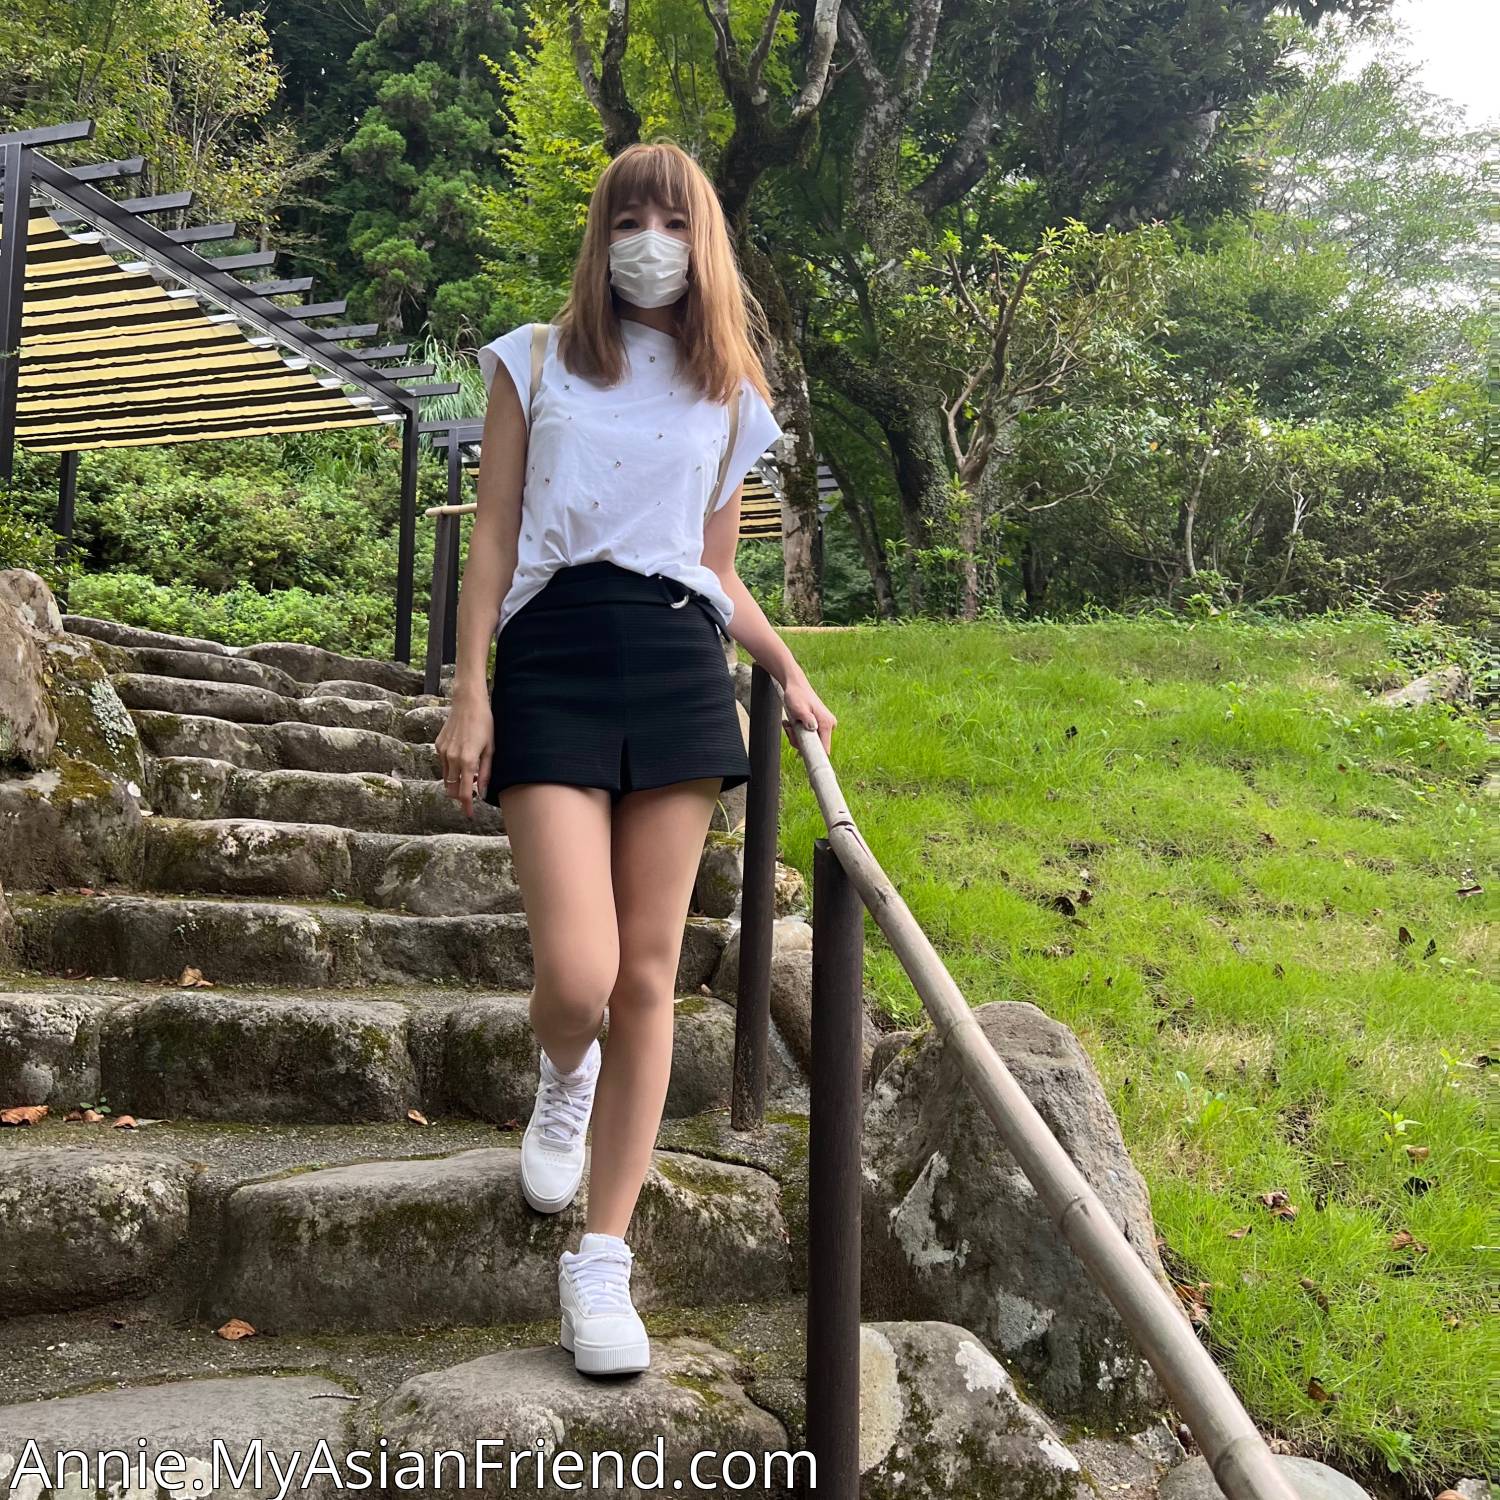 Annie's personal blog photo 1 added Sunday the 18th of September 2022